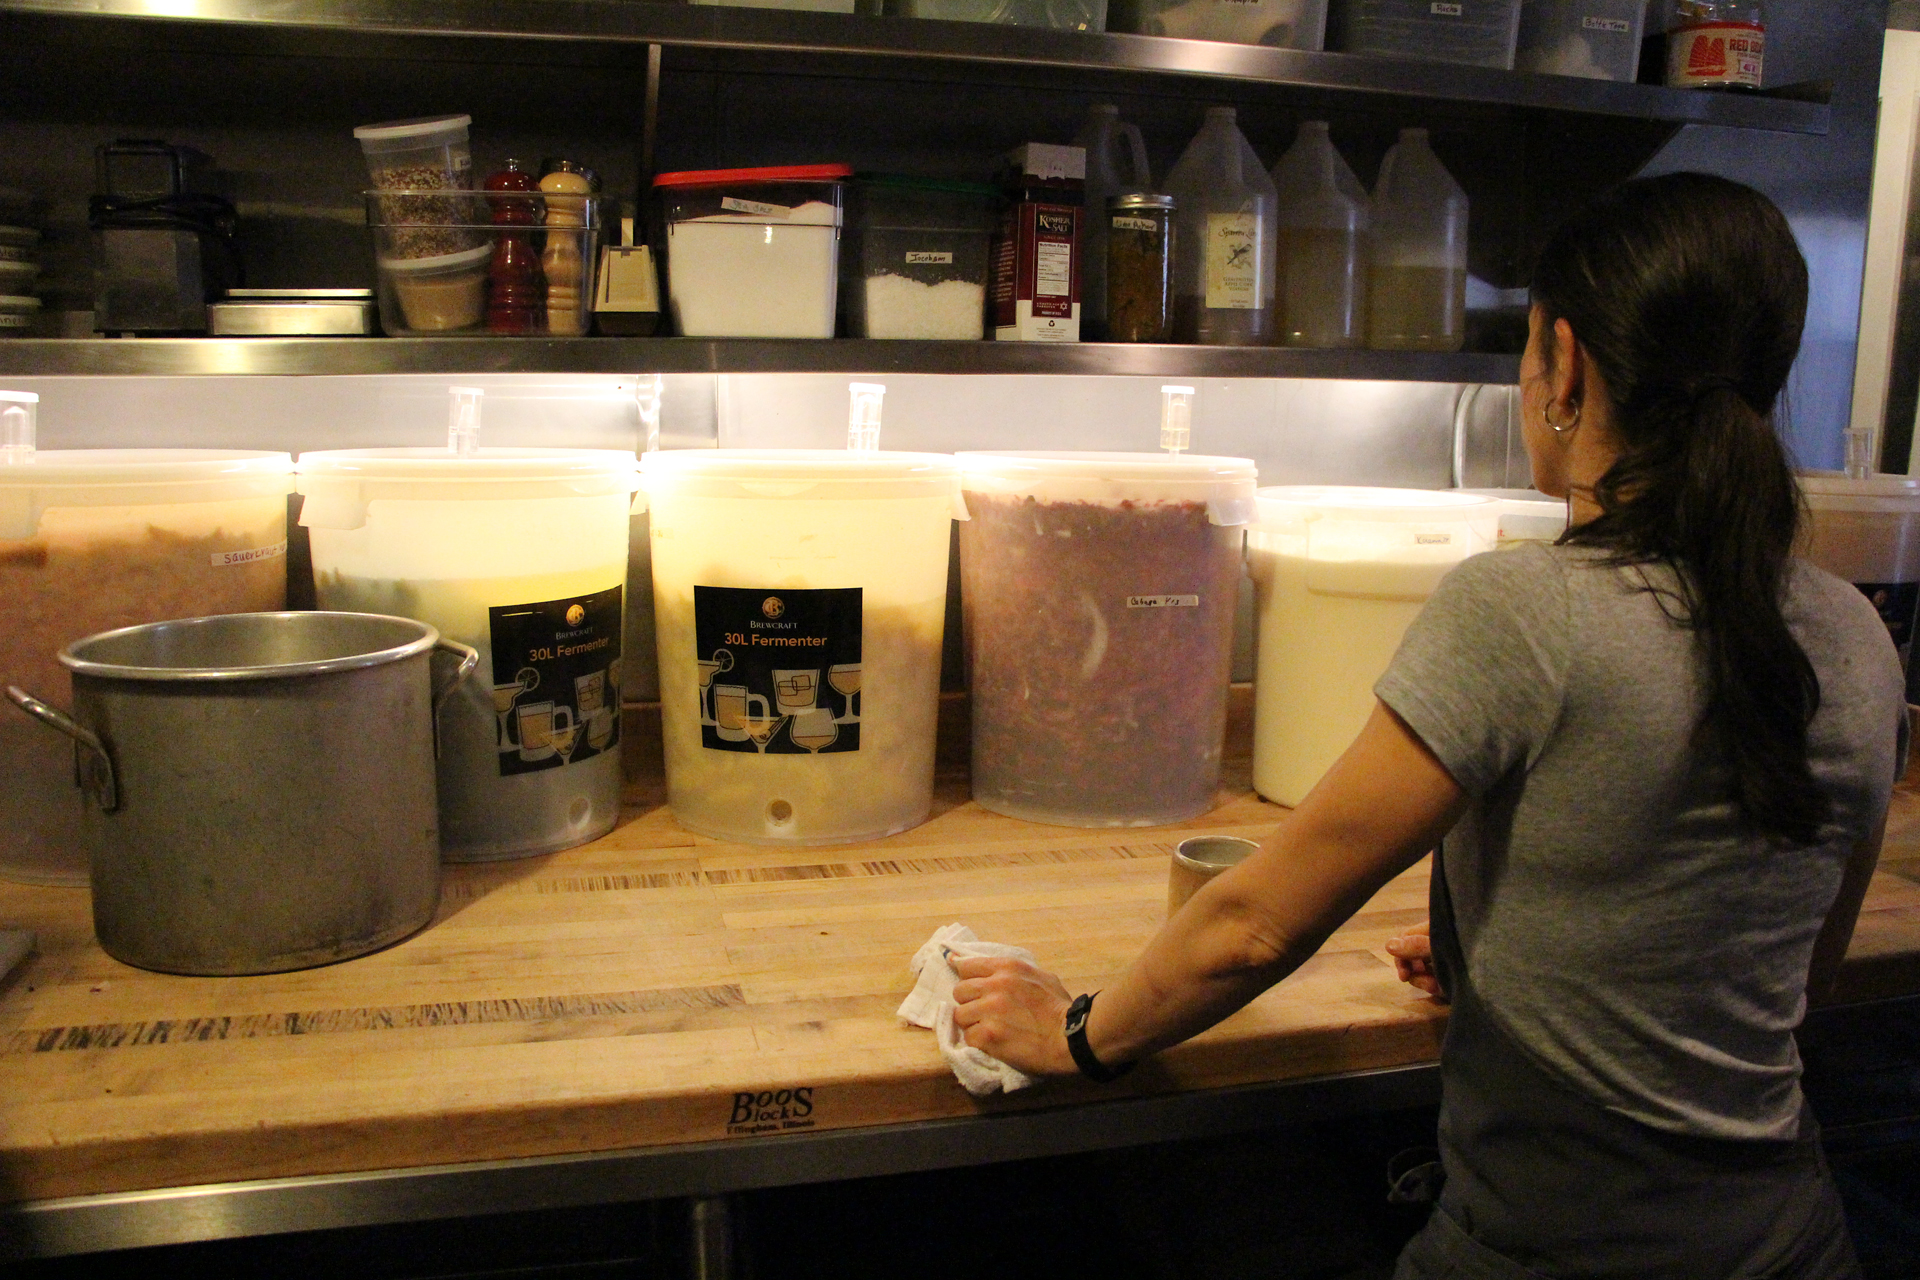 Fermentation tubs with melon juice and kefir cream, red cabbage kraut and more. Photo: Wendy Goodfriend